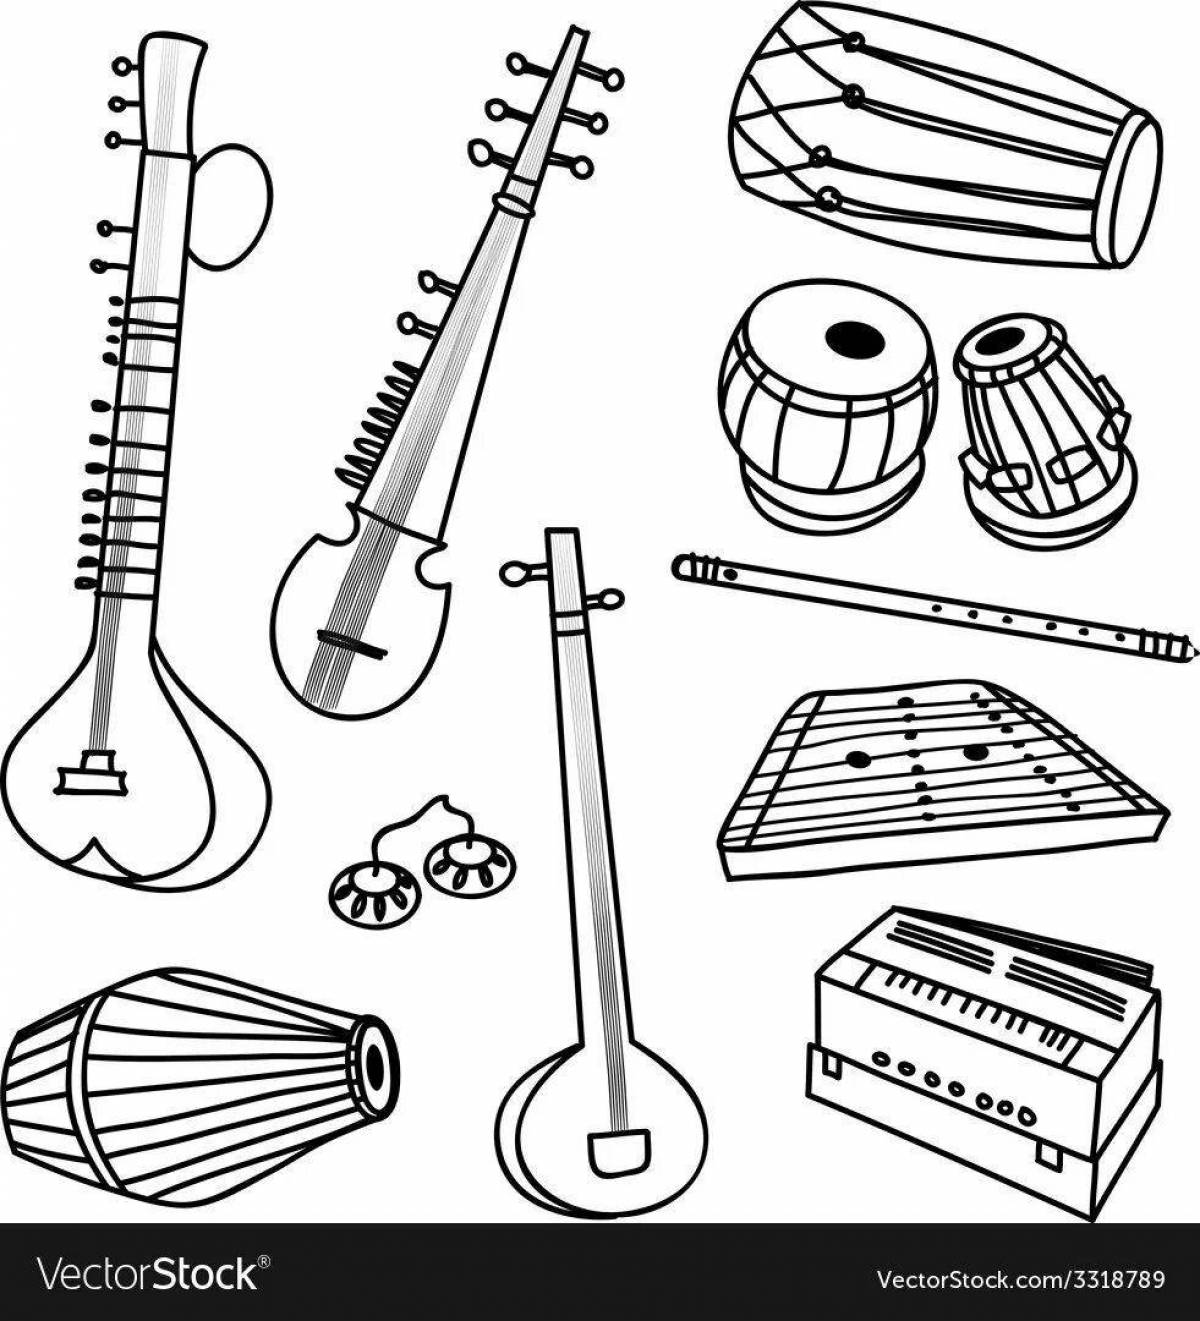 Coloring page exciting Russian folk musical instruments